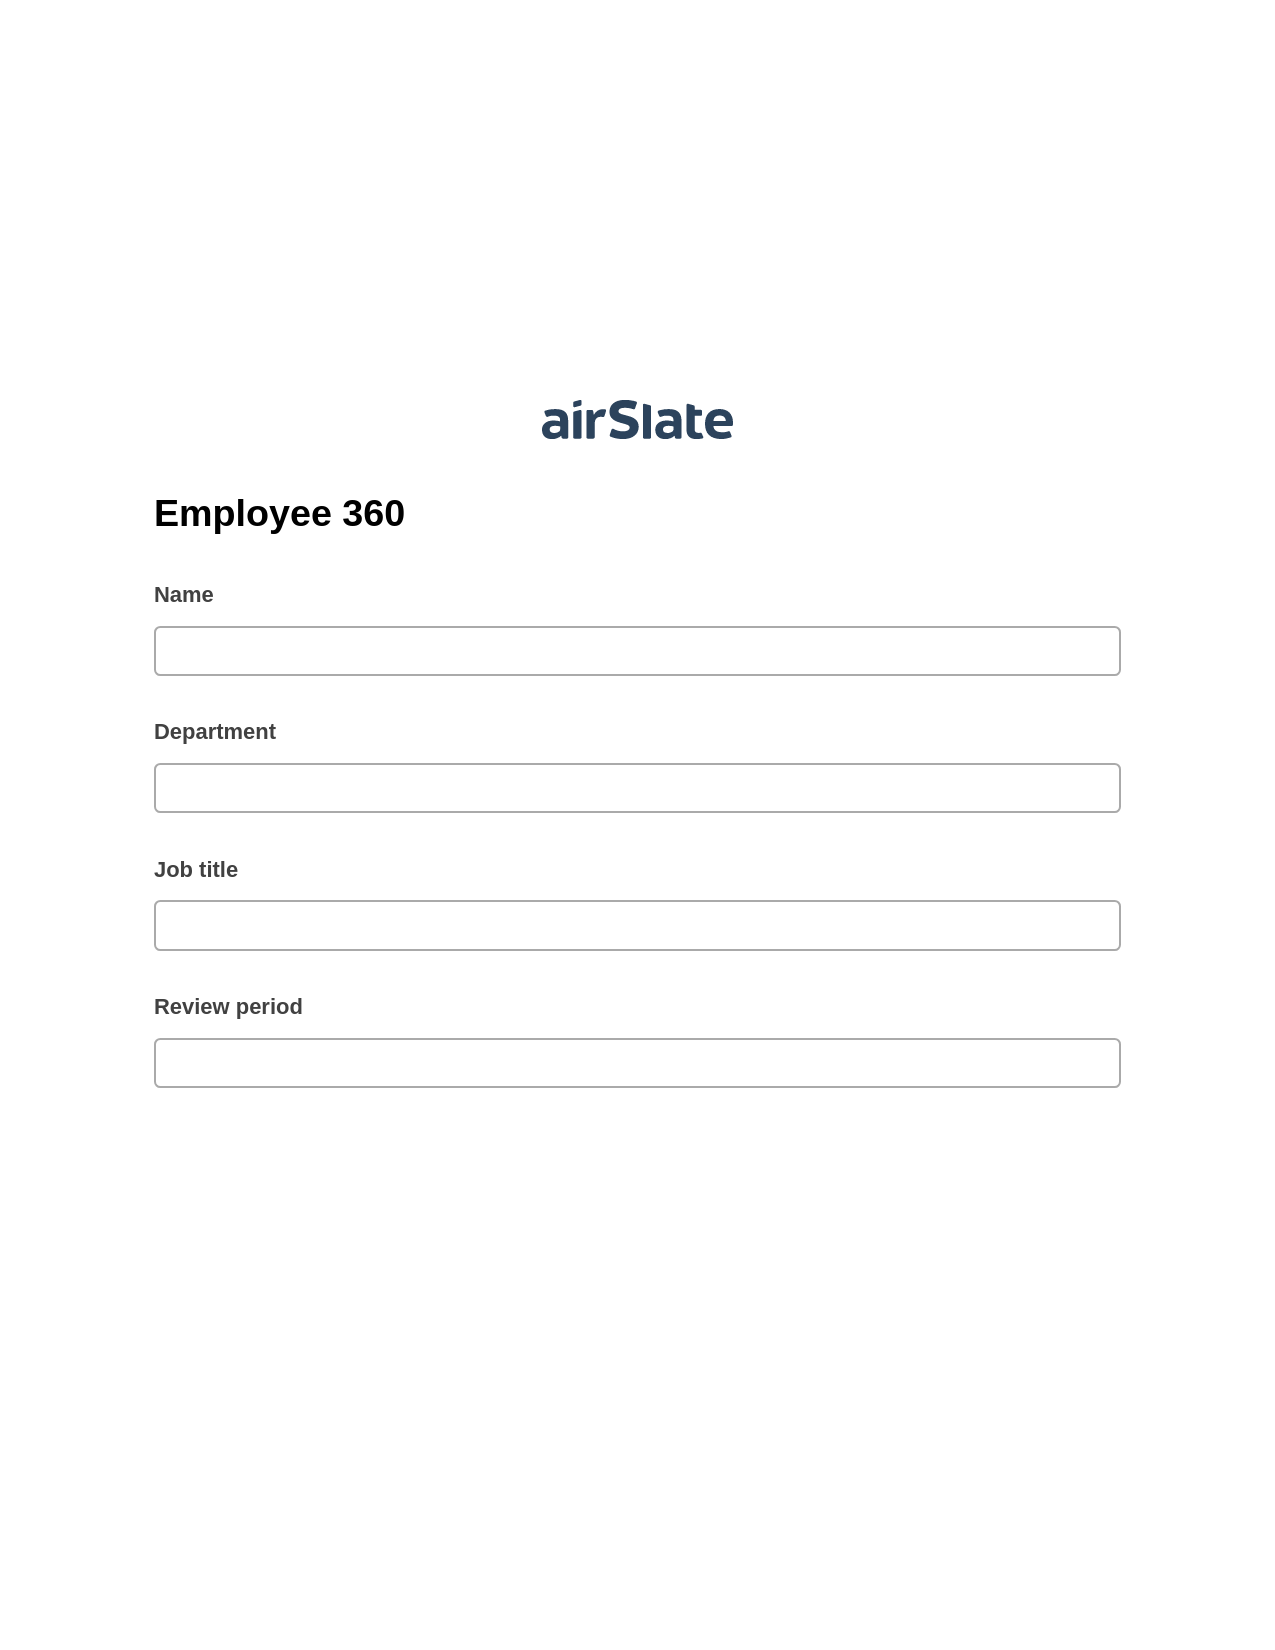 Multirole Employee 360 Pre-fill from Google Sheets Bot, Lock the Slate Bot, Archive to Dropbox Bot